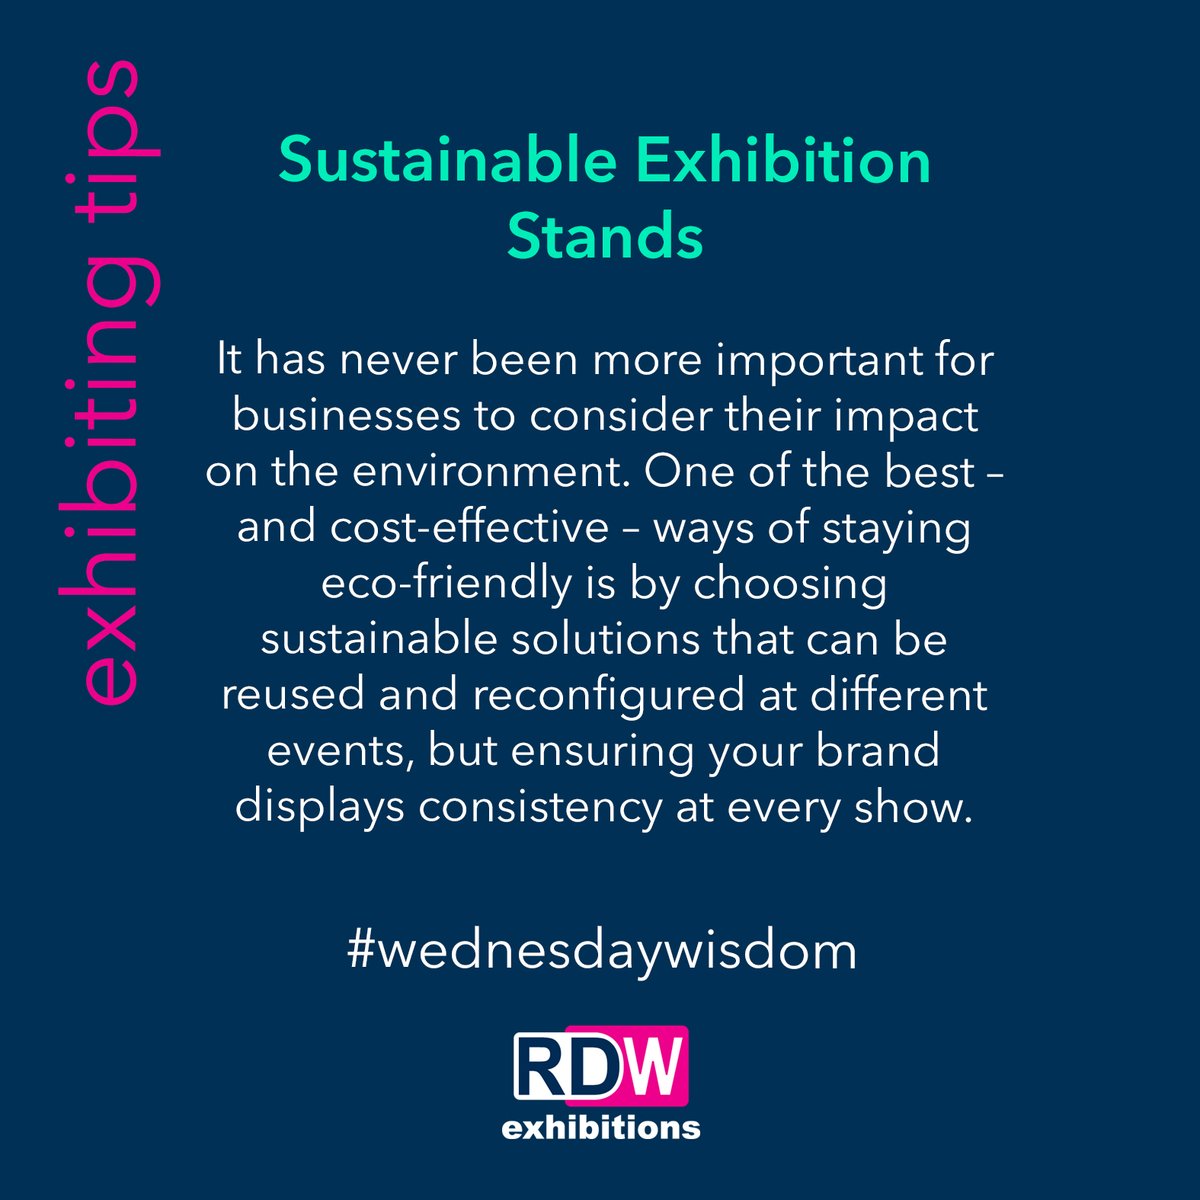 The benefits of sustainable exhibition stands ➡️ rdwexhibitions.co.uk/our-stands-exp…

#sustainableexhibitions #sustainablestands #sustainableexhibiting #modularstands #modularsystems #exhibitiondesigners #exhibitionsuppliers #standbuilders #exhibitioncontractors #exhibitiongraphics